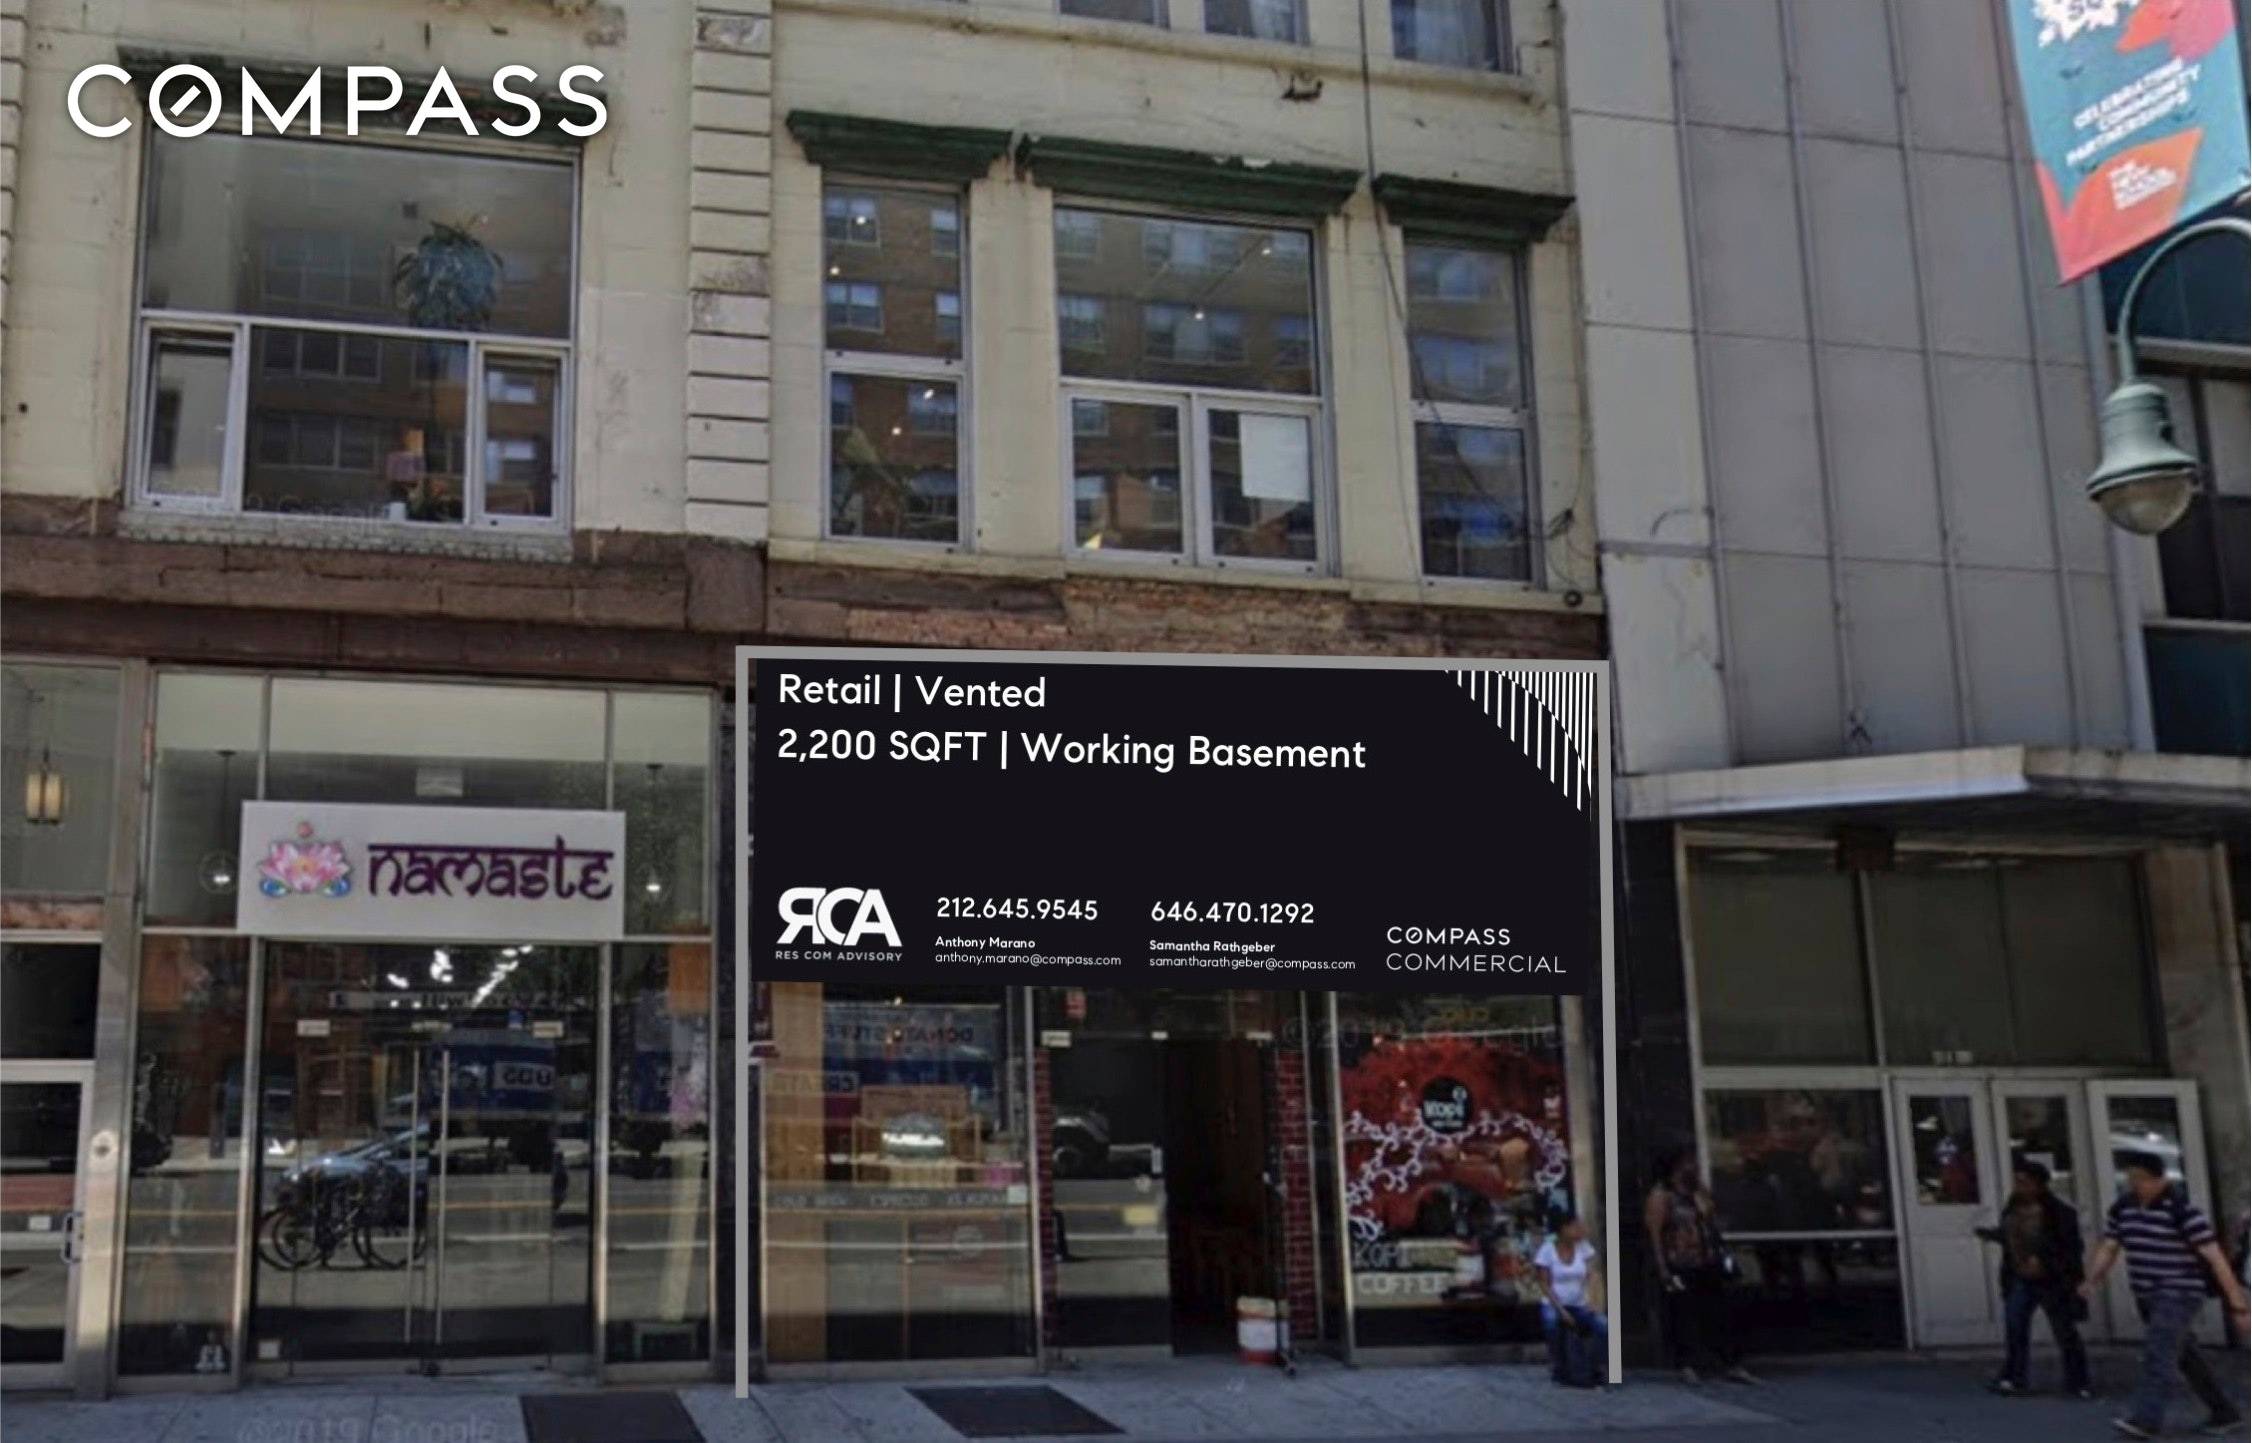 EMAIL FOR FULL SET UP Compass has been retained to offer 4 6 West 14th Street Retail for Lease in Union Square.